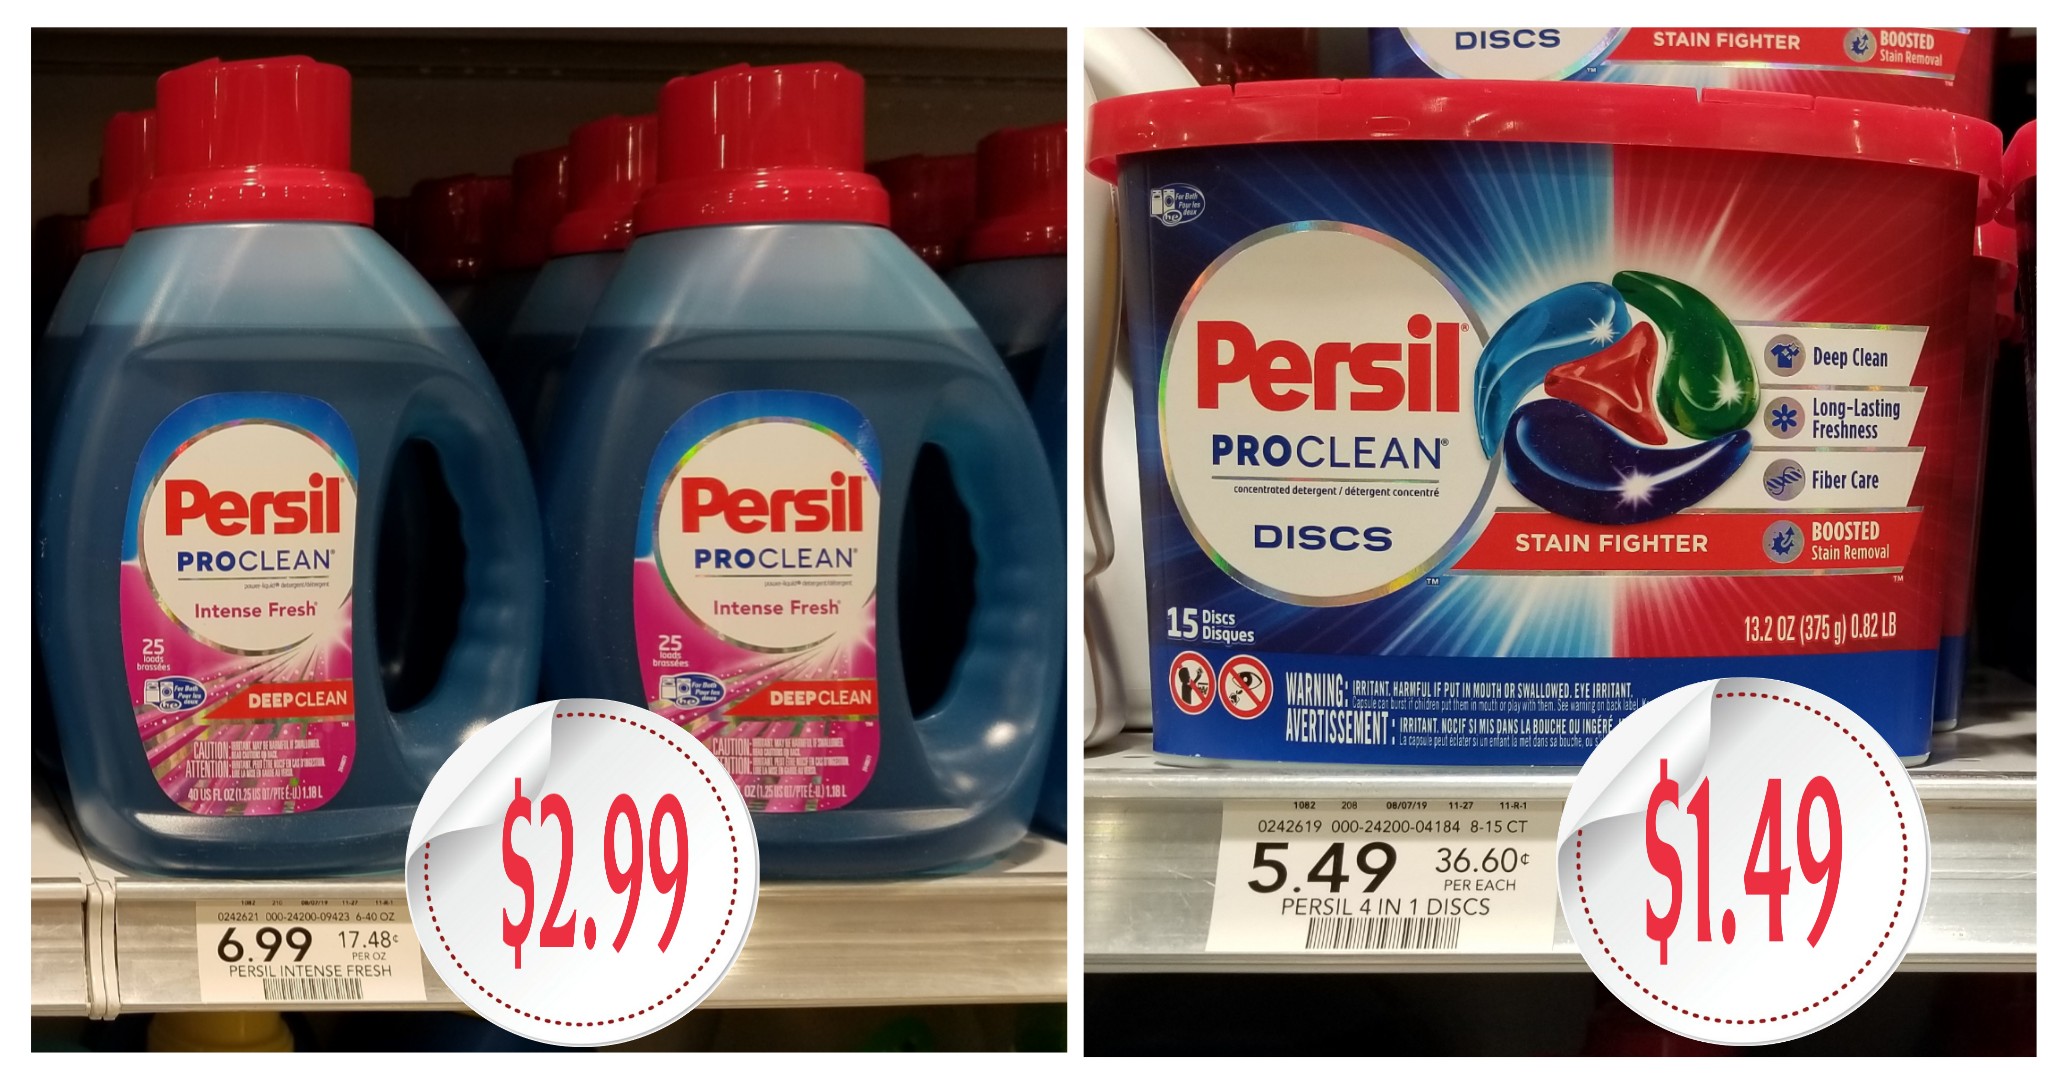 Persil Laundry Detergent (Only $2.99 each) – Discs (Only $1.49 each)